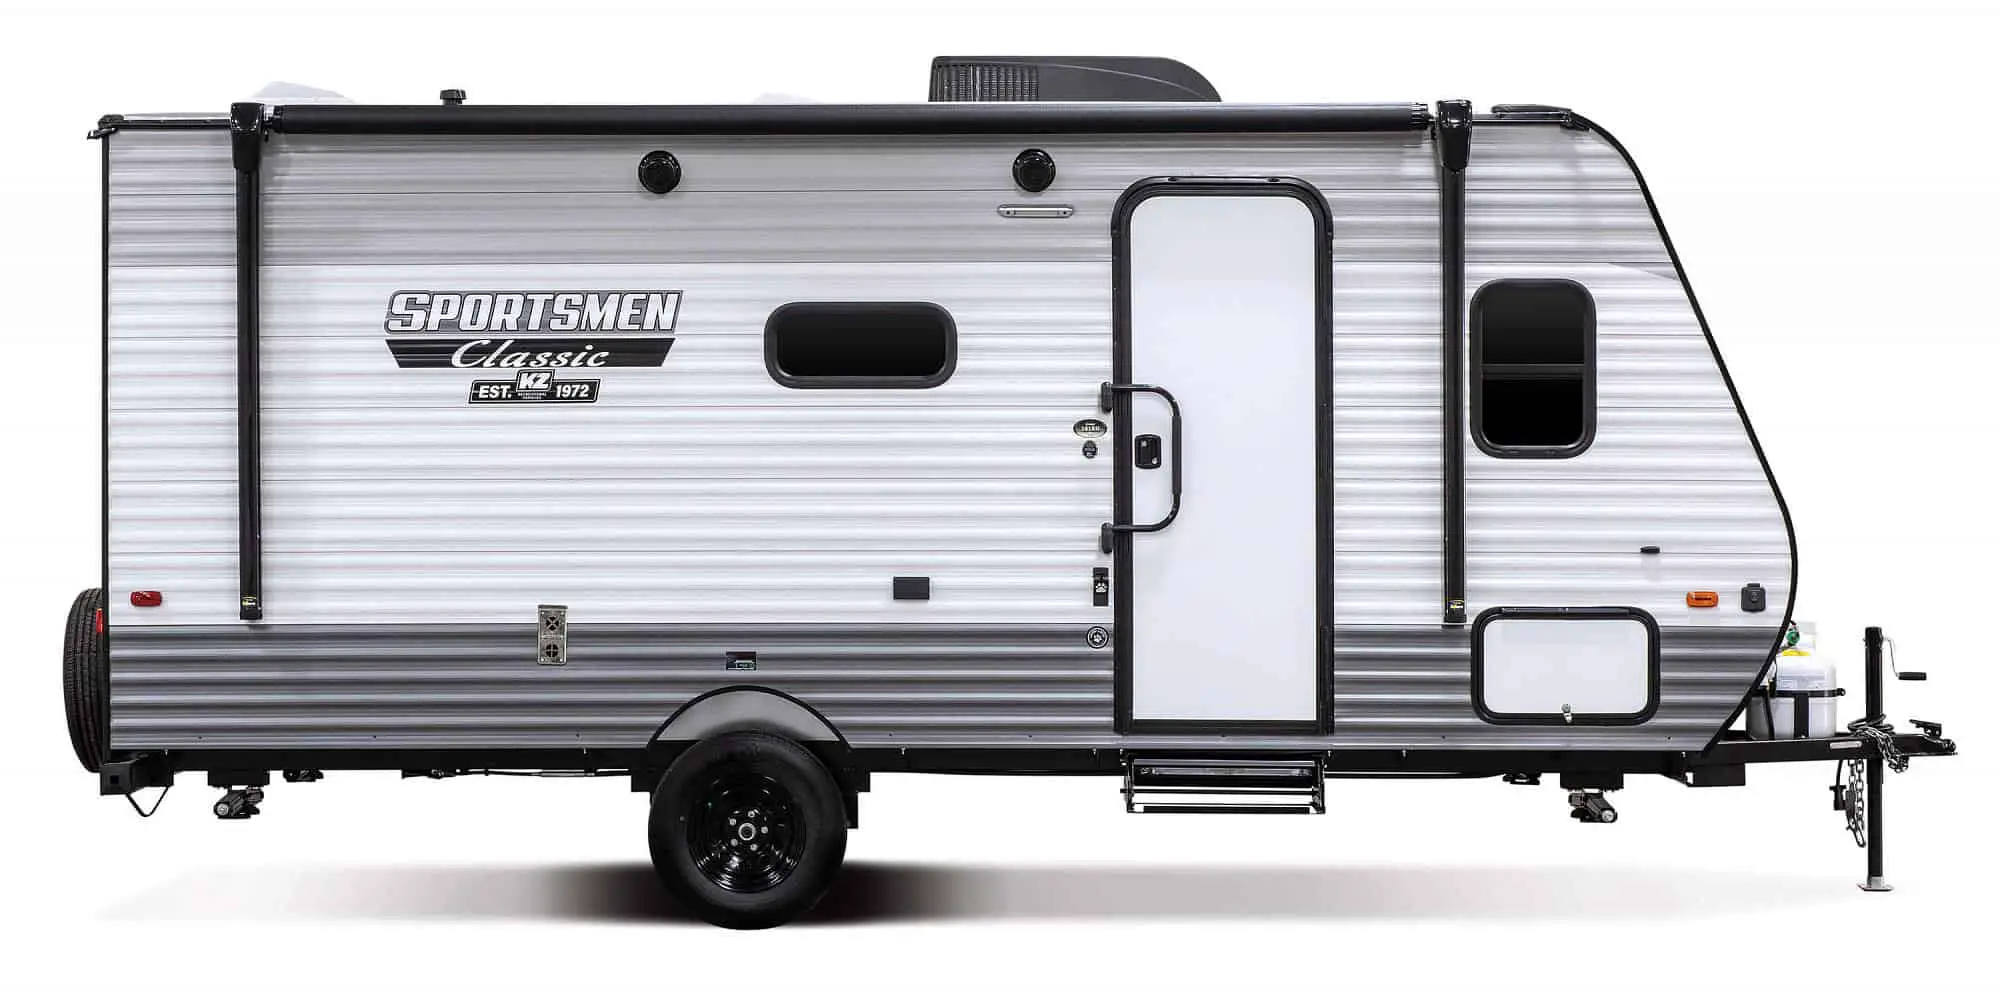 Bunkhouse Travel Trailer Under 5000 lbs - Team Camping